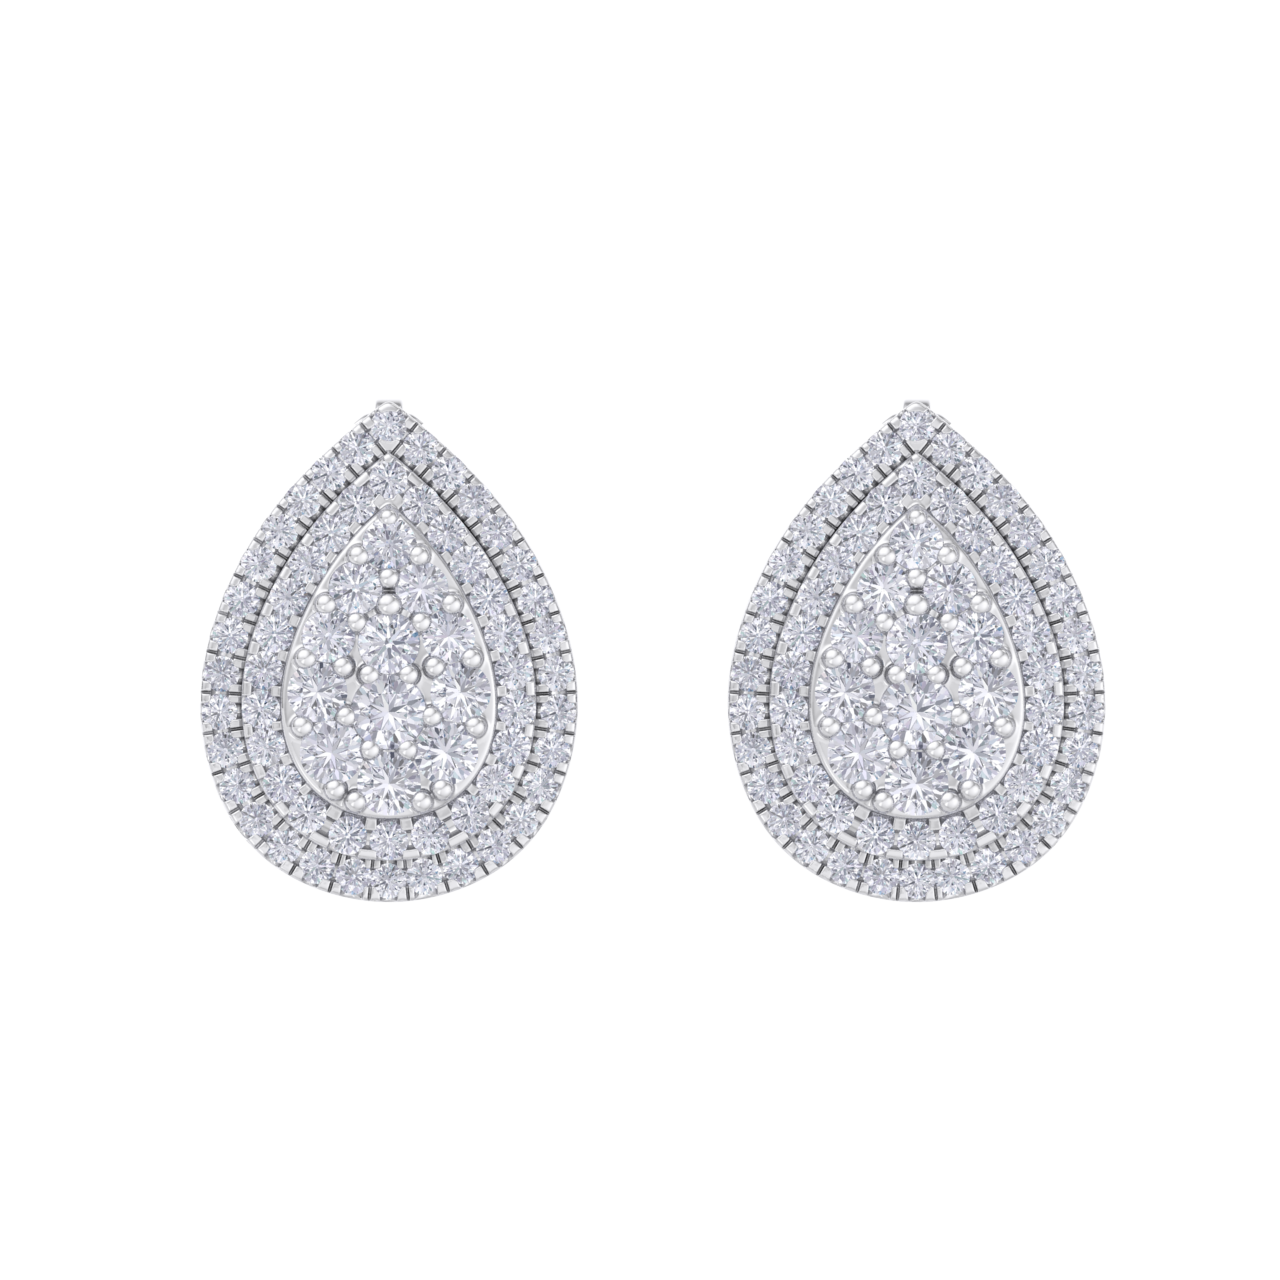 3 in 1 earrings in white gold with white diamonds of 0.85 ct in weight